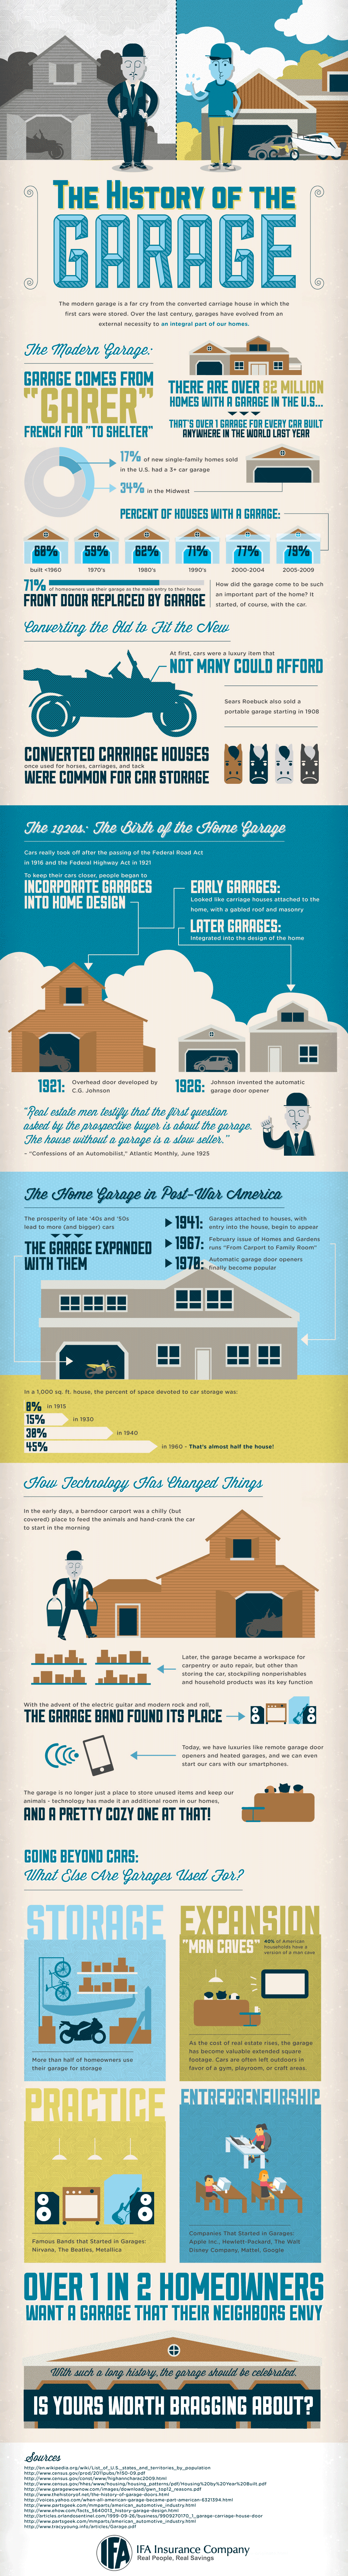 history-of-the-garage